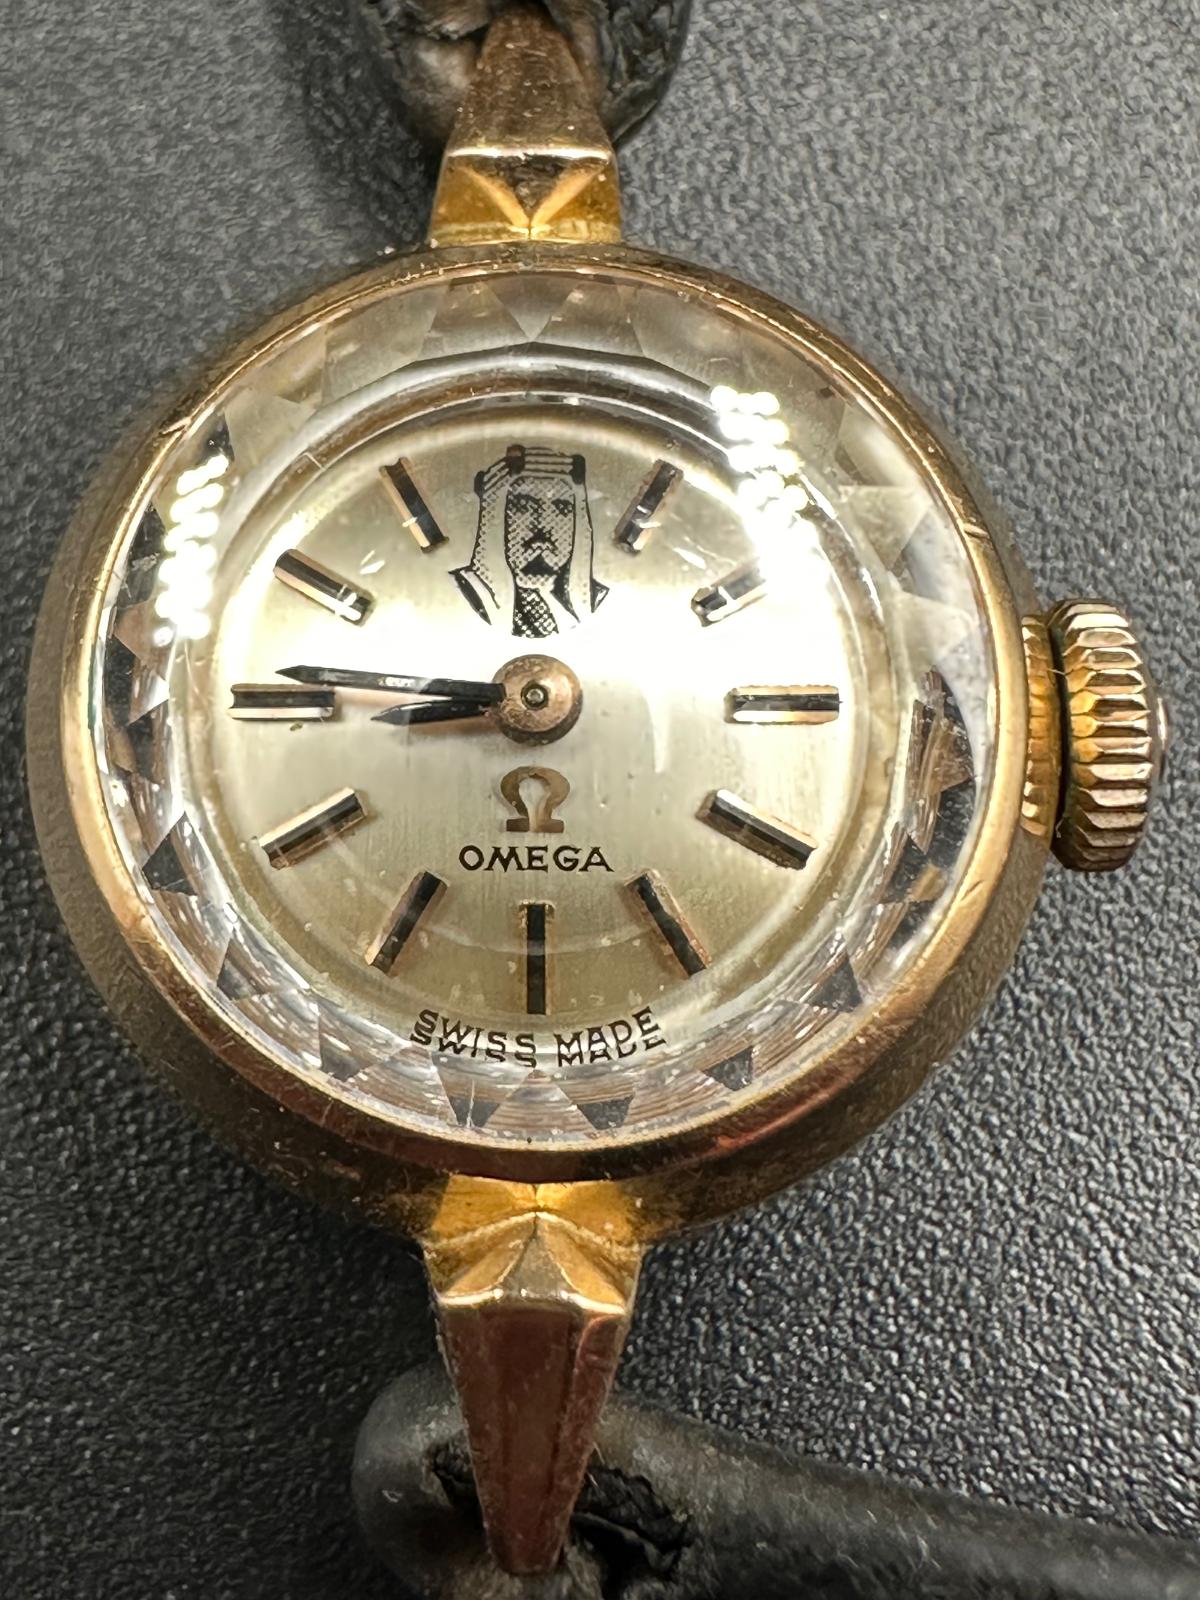 A rare ladies Omega gold watch on leather bracelet with image of a Sheik's head. - Image 4 of 4